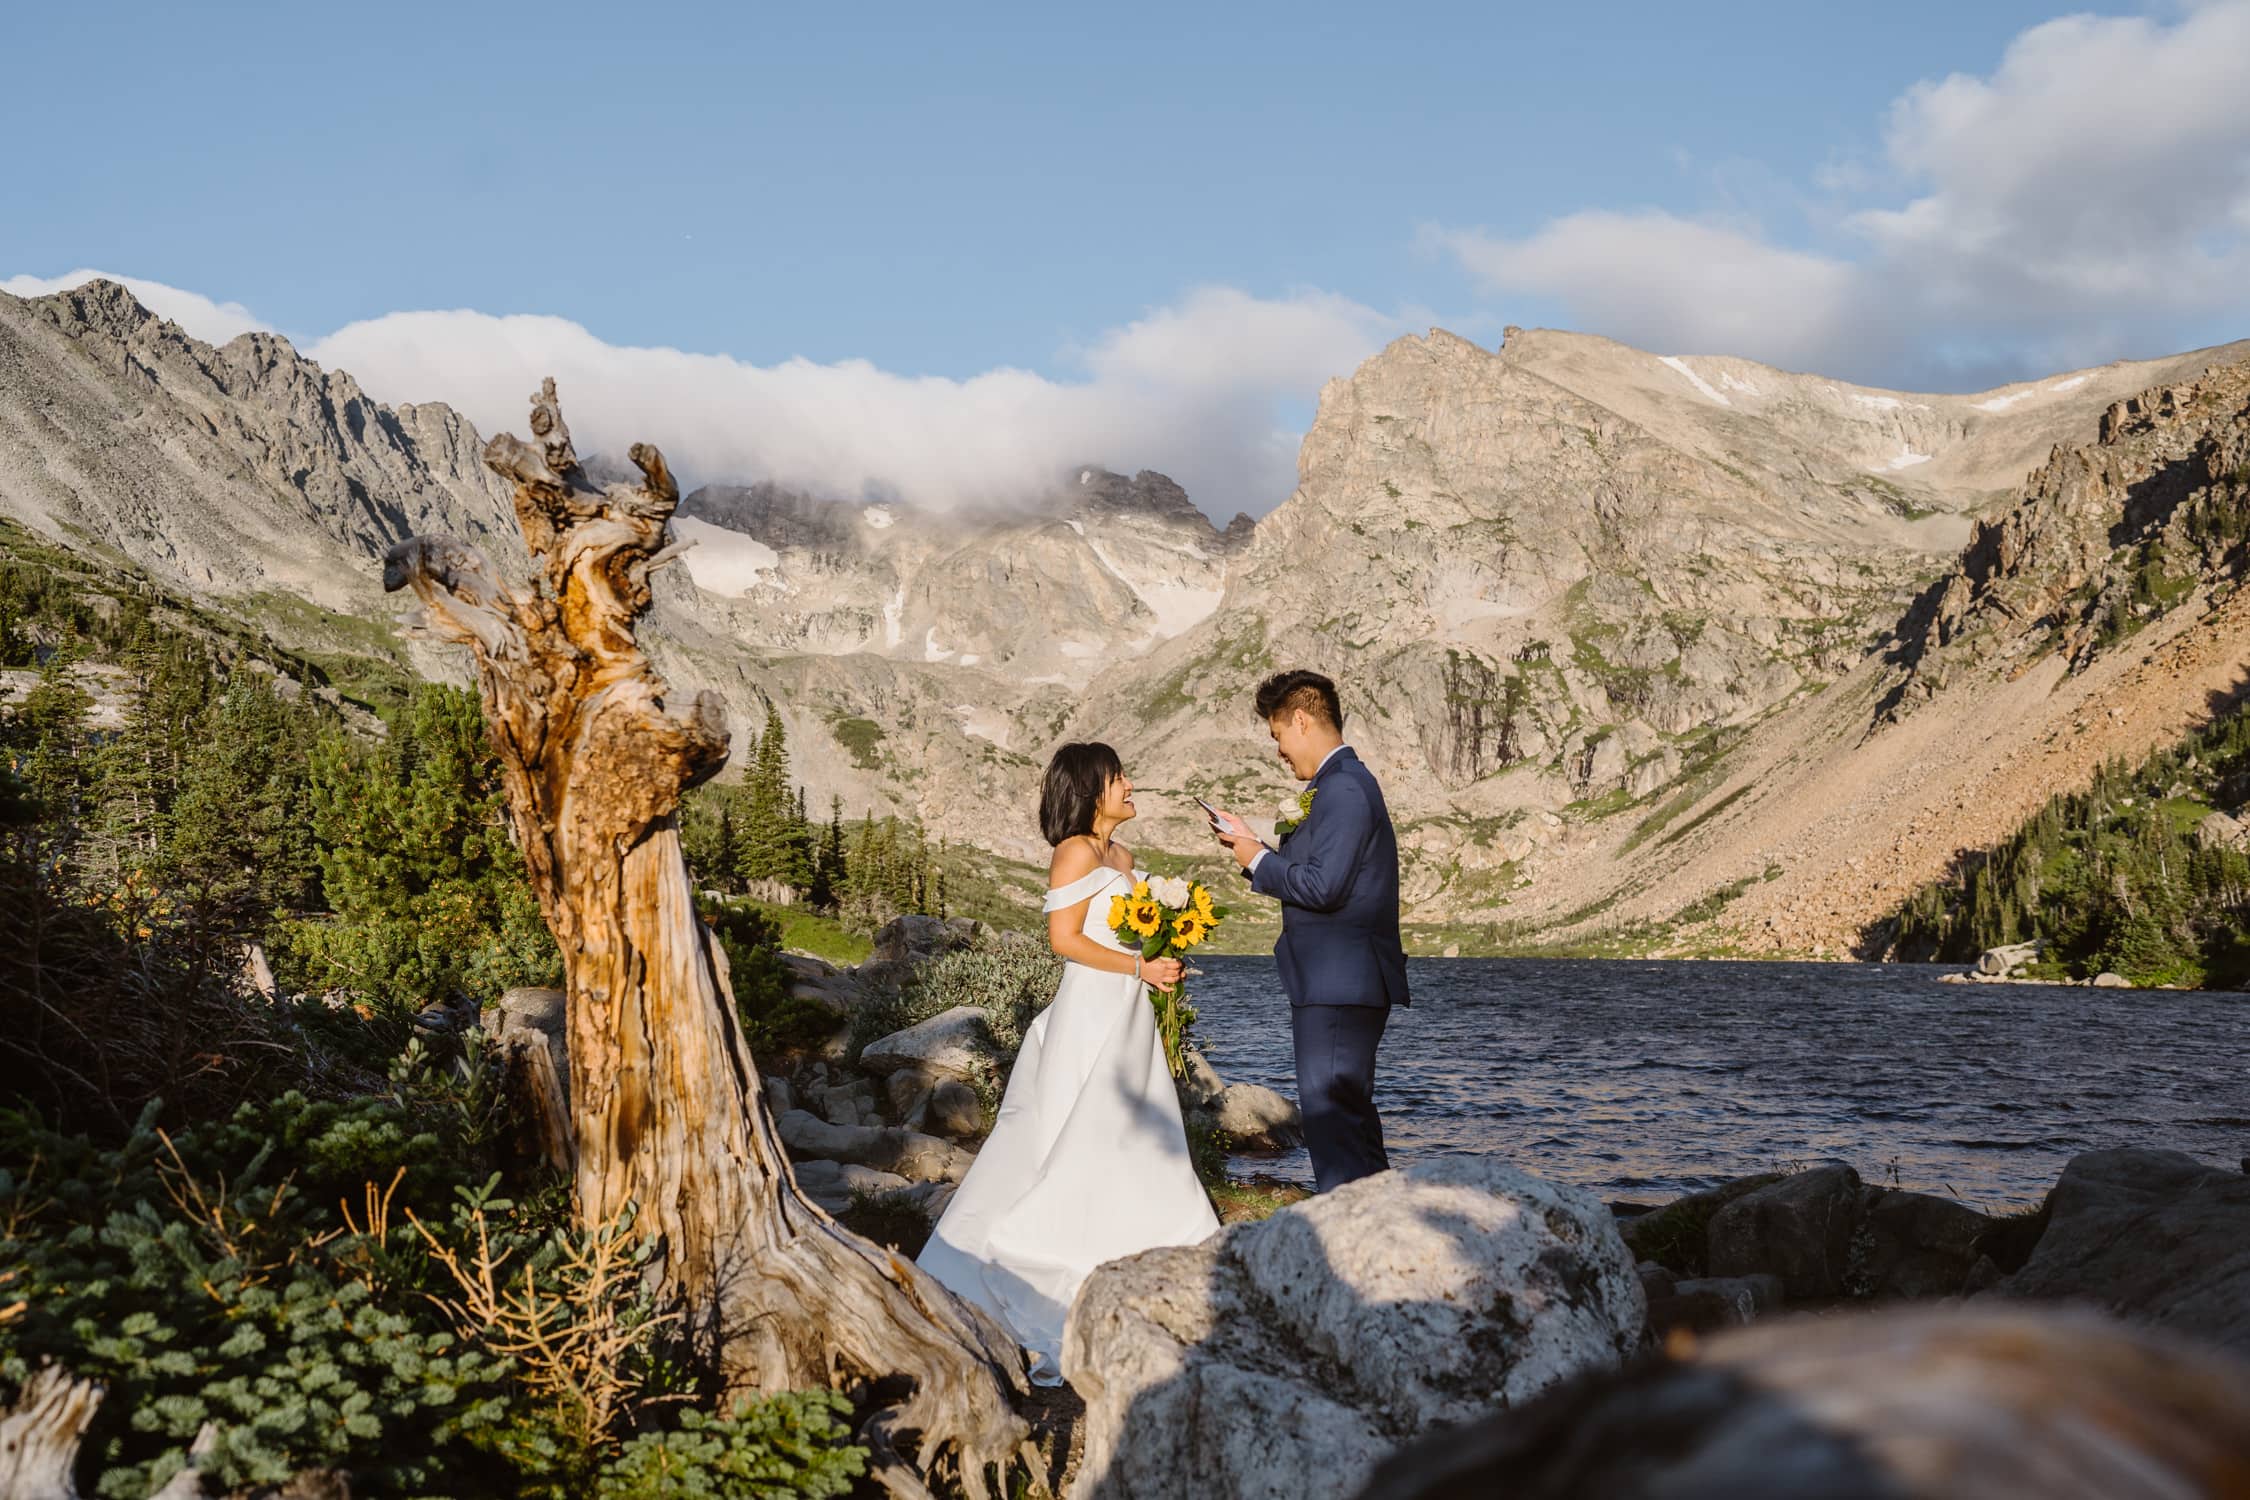 A couple sharing their vows at sunrise at Lake Isabelle in Colorado